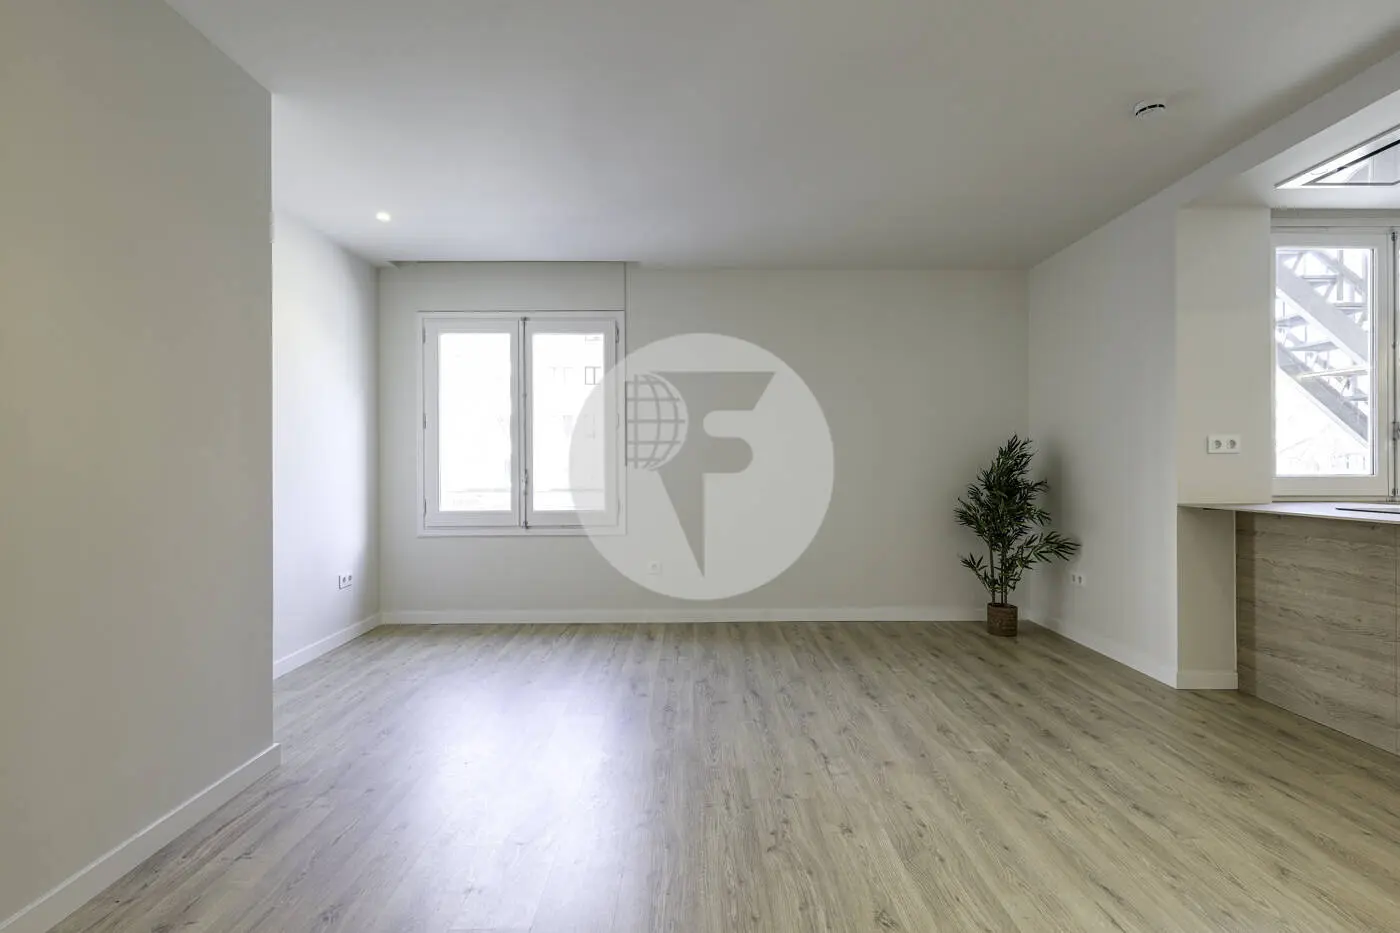 Spectacular apartment in the Eixample completely renovated. 2